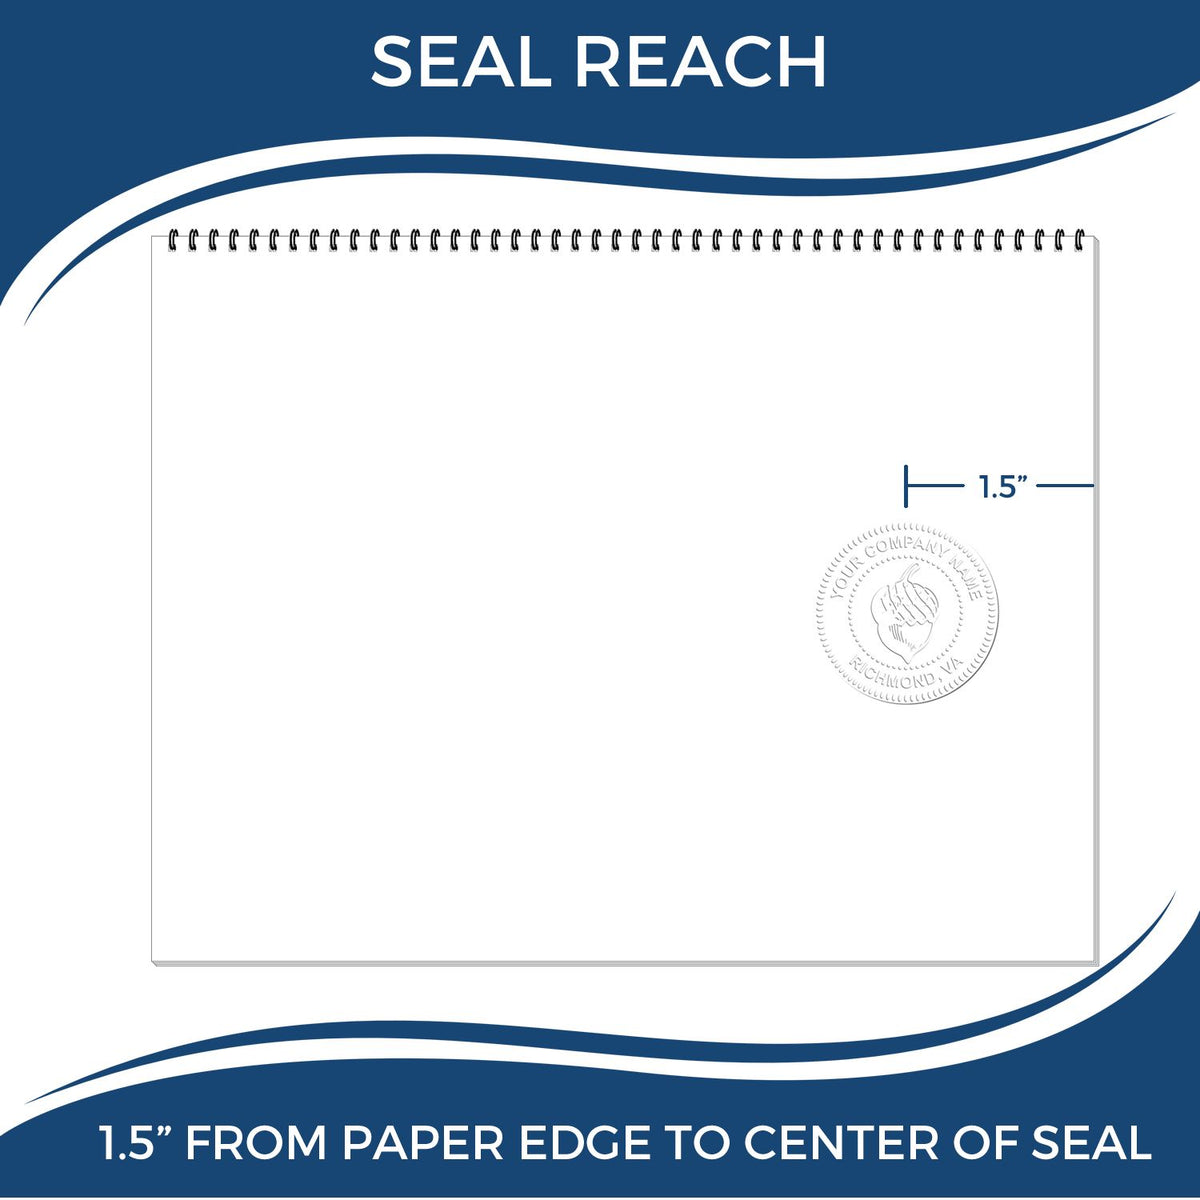 An infographic showing the seal reach which is represented by a ruler and a miniature seal image of the Hybrid New Mexico Land Surveyor Seal